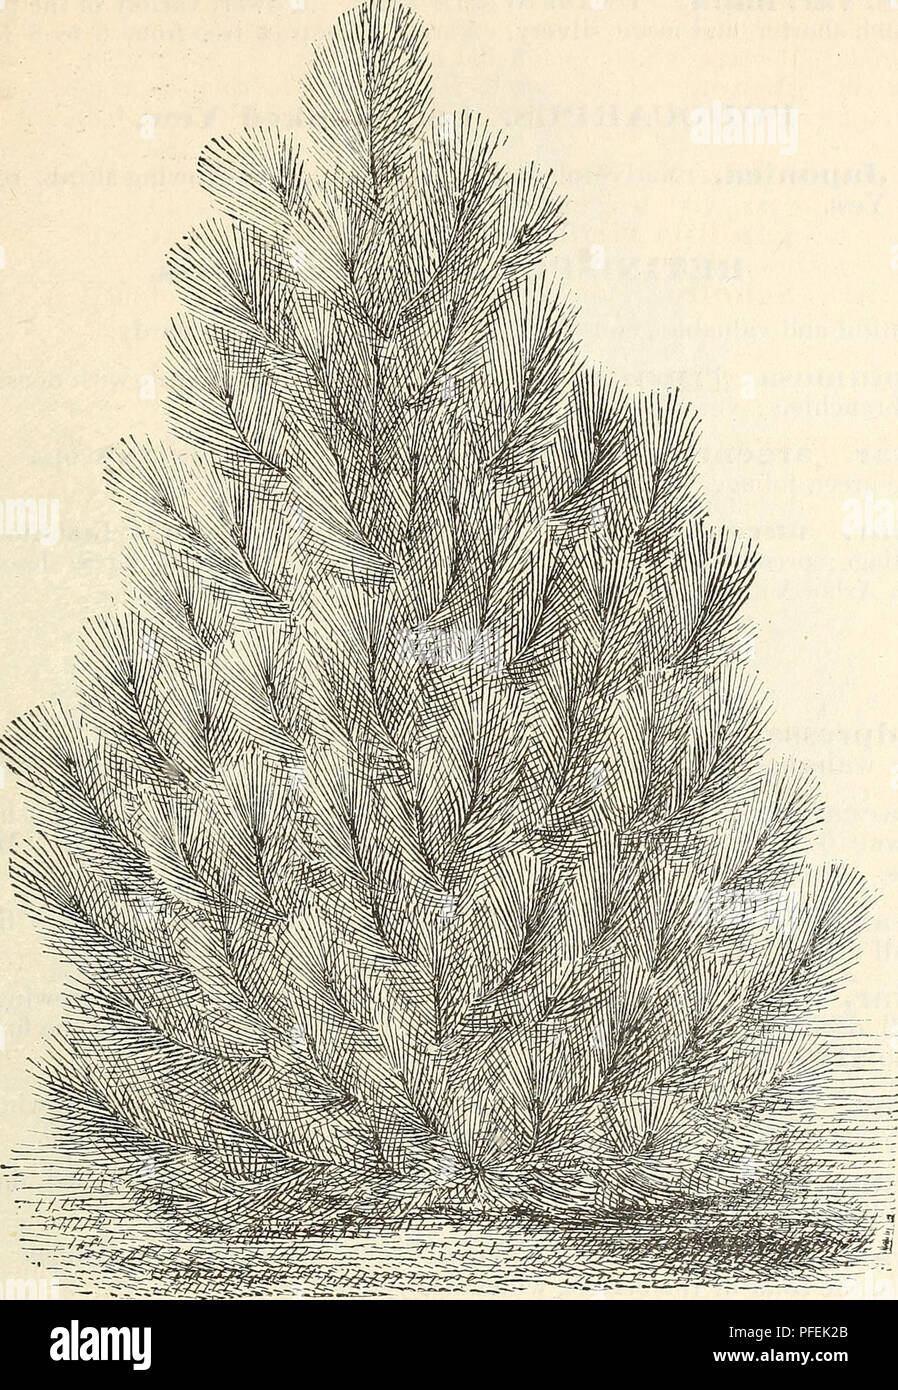 . Descriptive catalogue of hardy ornamental trees, shrubs, herbaceous perennial plants, etc. : twenty-fourth edition. Ornamental trees Catalogs; Shrubs Catalogs; Roses Catalogs; Flowers Catalogs. ORNAMENTAL TREES, SHRUBS, ETC. 51. PINUS PONDEROSA. Sec. III. Usually with five leaves in a sheath, fP. Ceml)ra. Swiss Stone Pine. A handsome and distinct European species, of a compact, conical form ; foliage short and silvery. Grows slowly when voung. $1.00 to $2.00. fP. excelsa. Lofty Bhotan Pine. A native of the mountains of Northern India. A graceful and elegant tree, with drooping silvery foliag Stock Photo